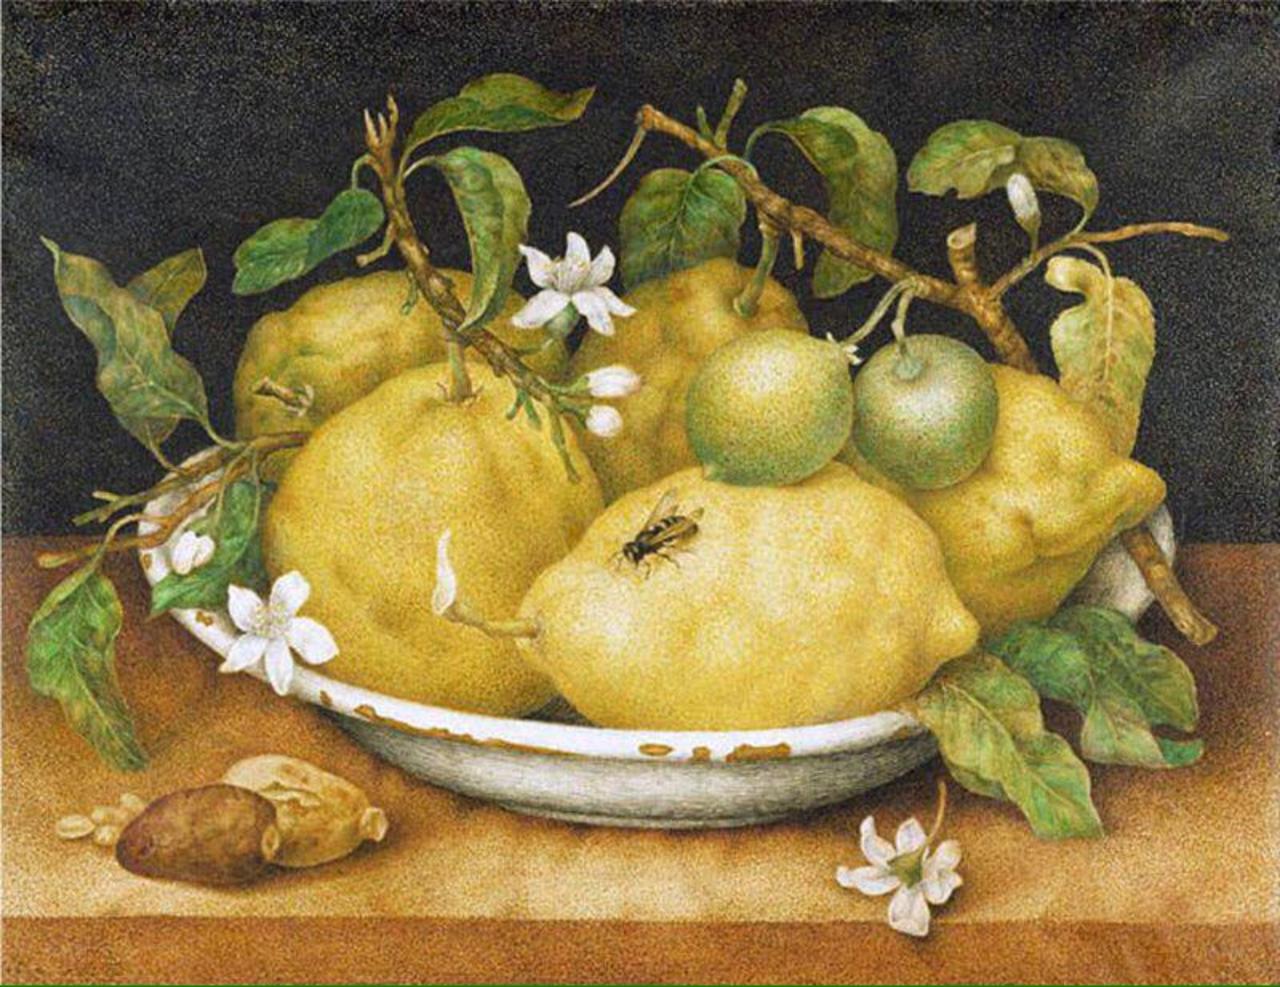 'Still Life with a Bowl of Citrons'
Giovanna Garzoni, c.1640 #art http://t.co/HeelHlwiCE